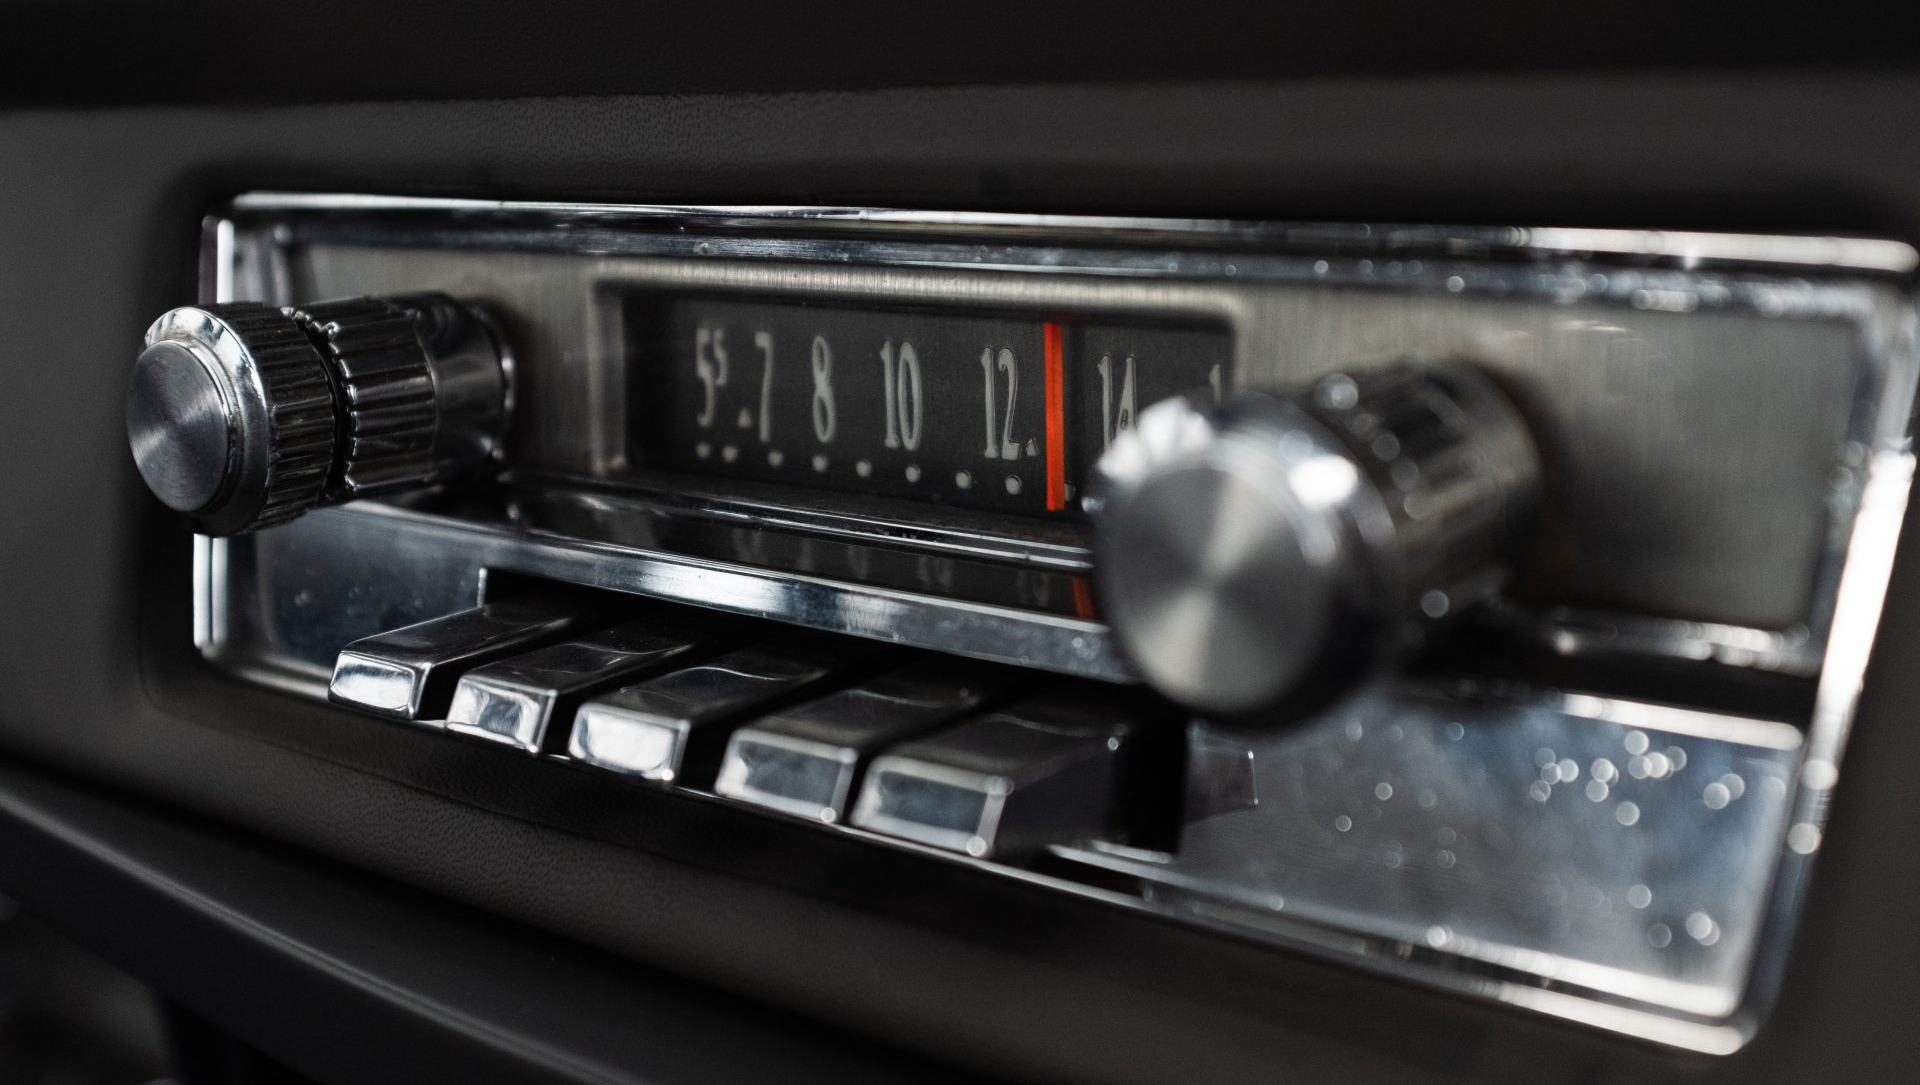 AM, FM, Digital, and Online Radio Station: What are the Key Differences?